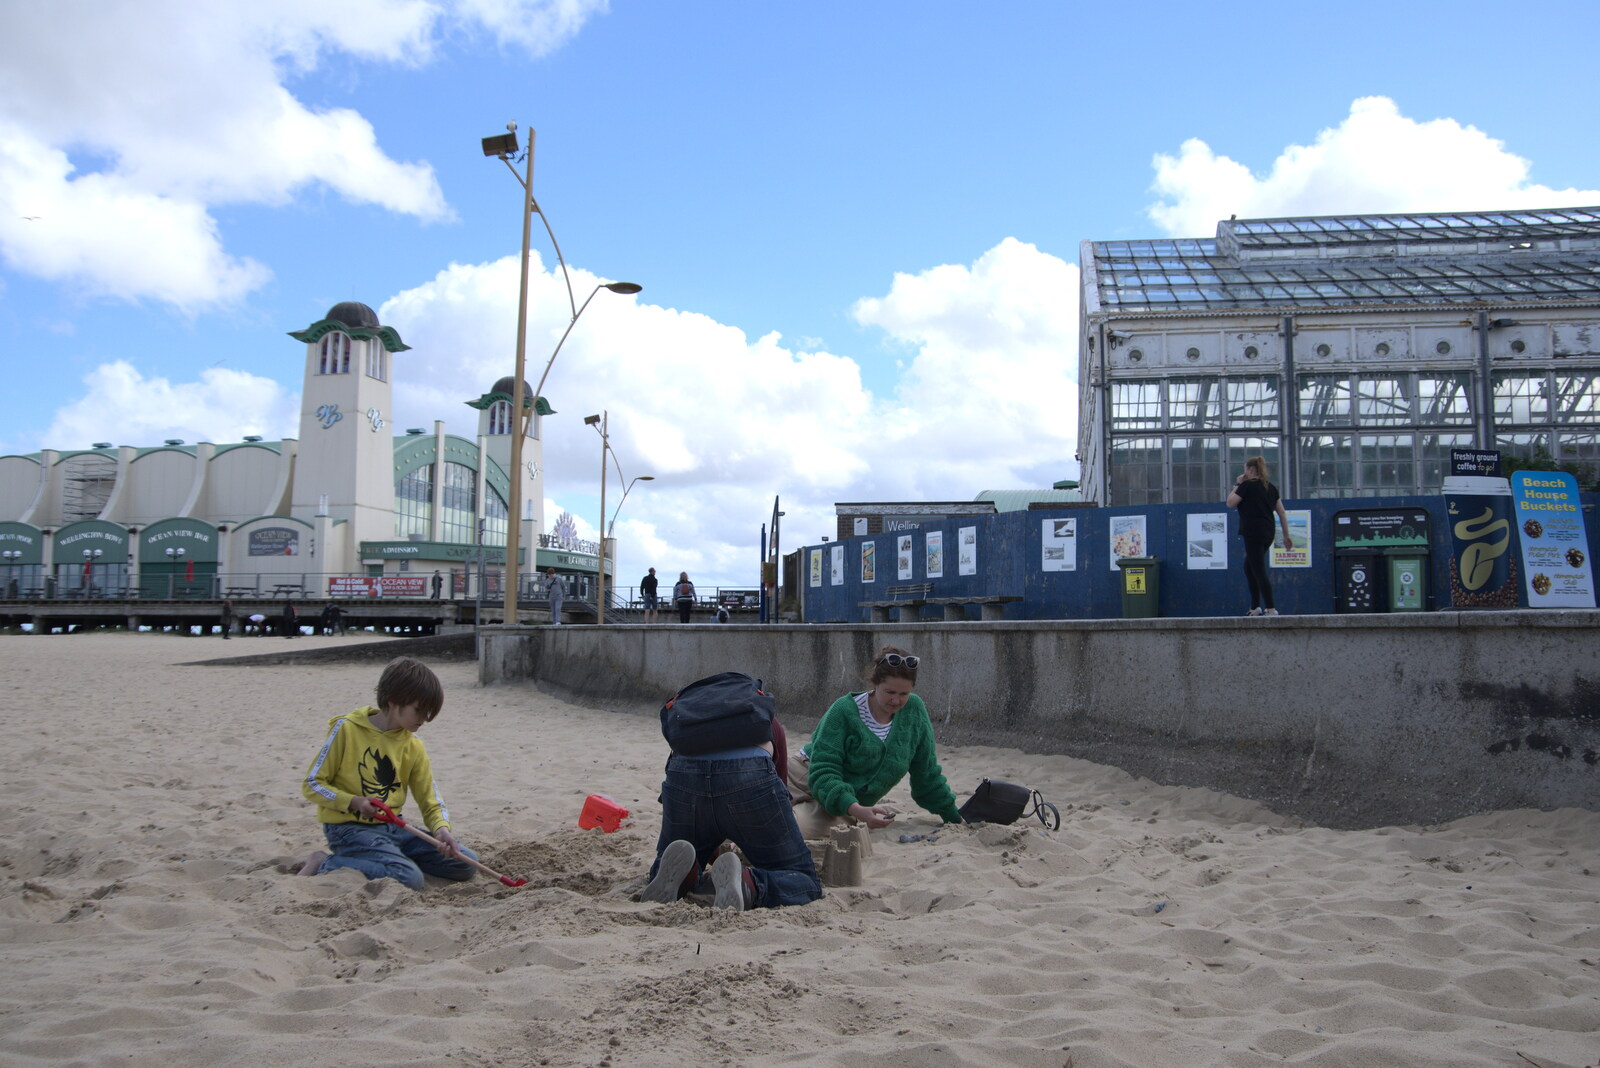 We do sandcastles on the beach from Faded Seaside Glamour: A Weekend in Great Yarmouth, Norfolk - 29th May 2022